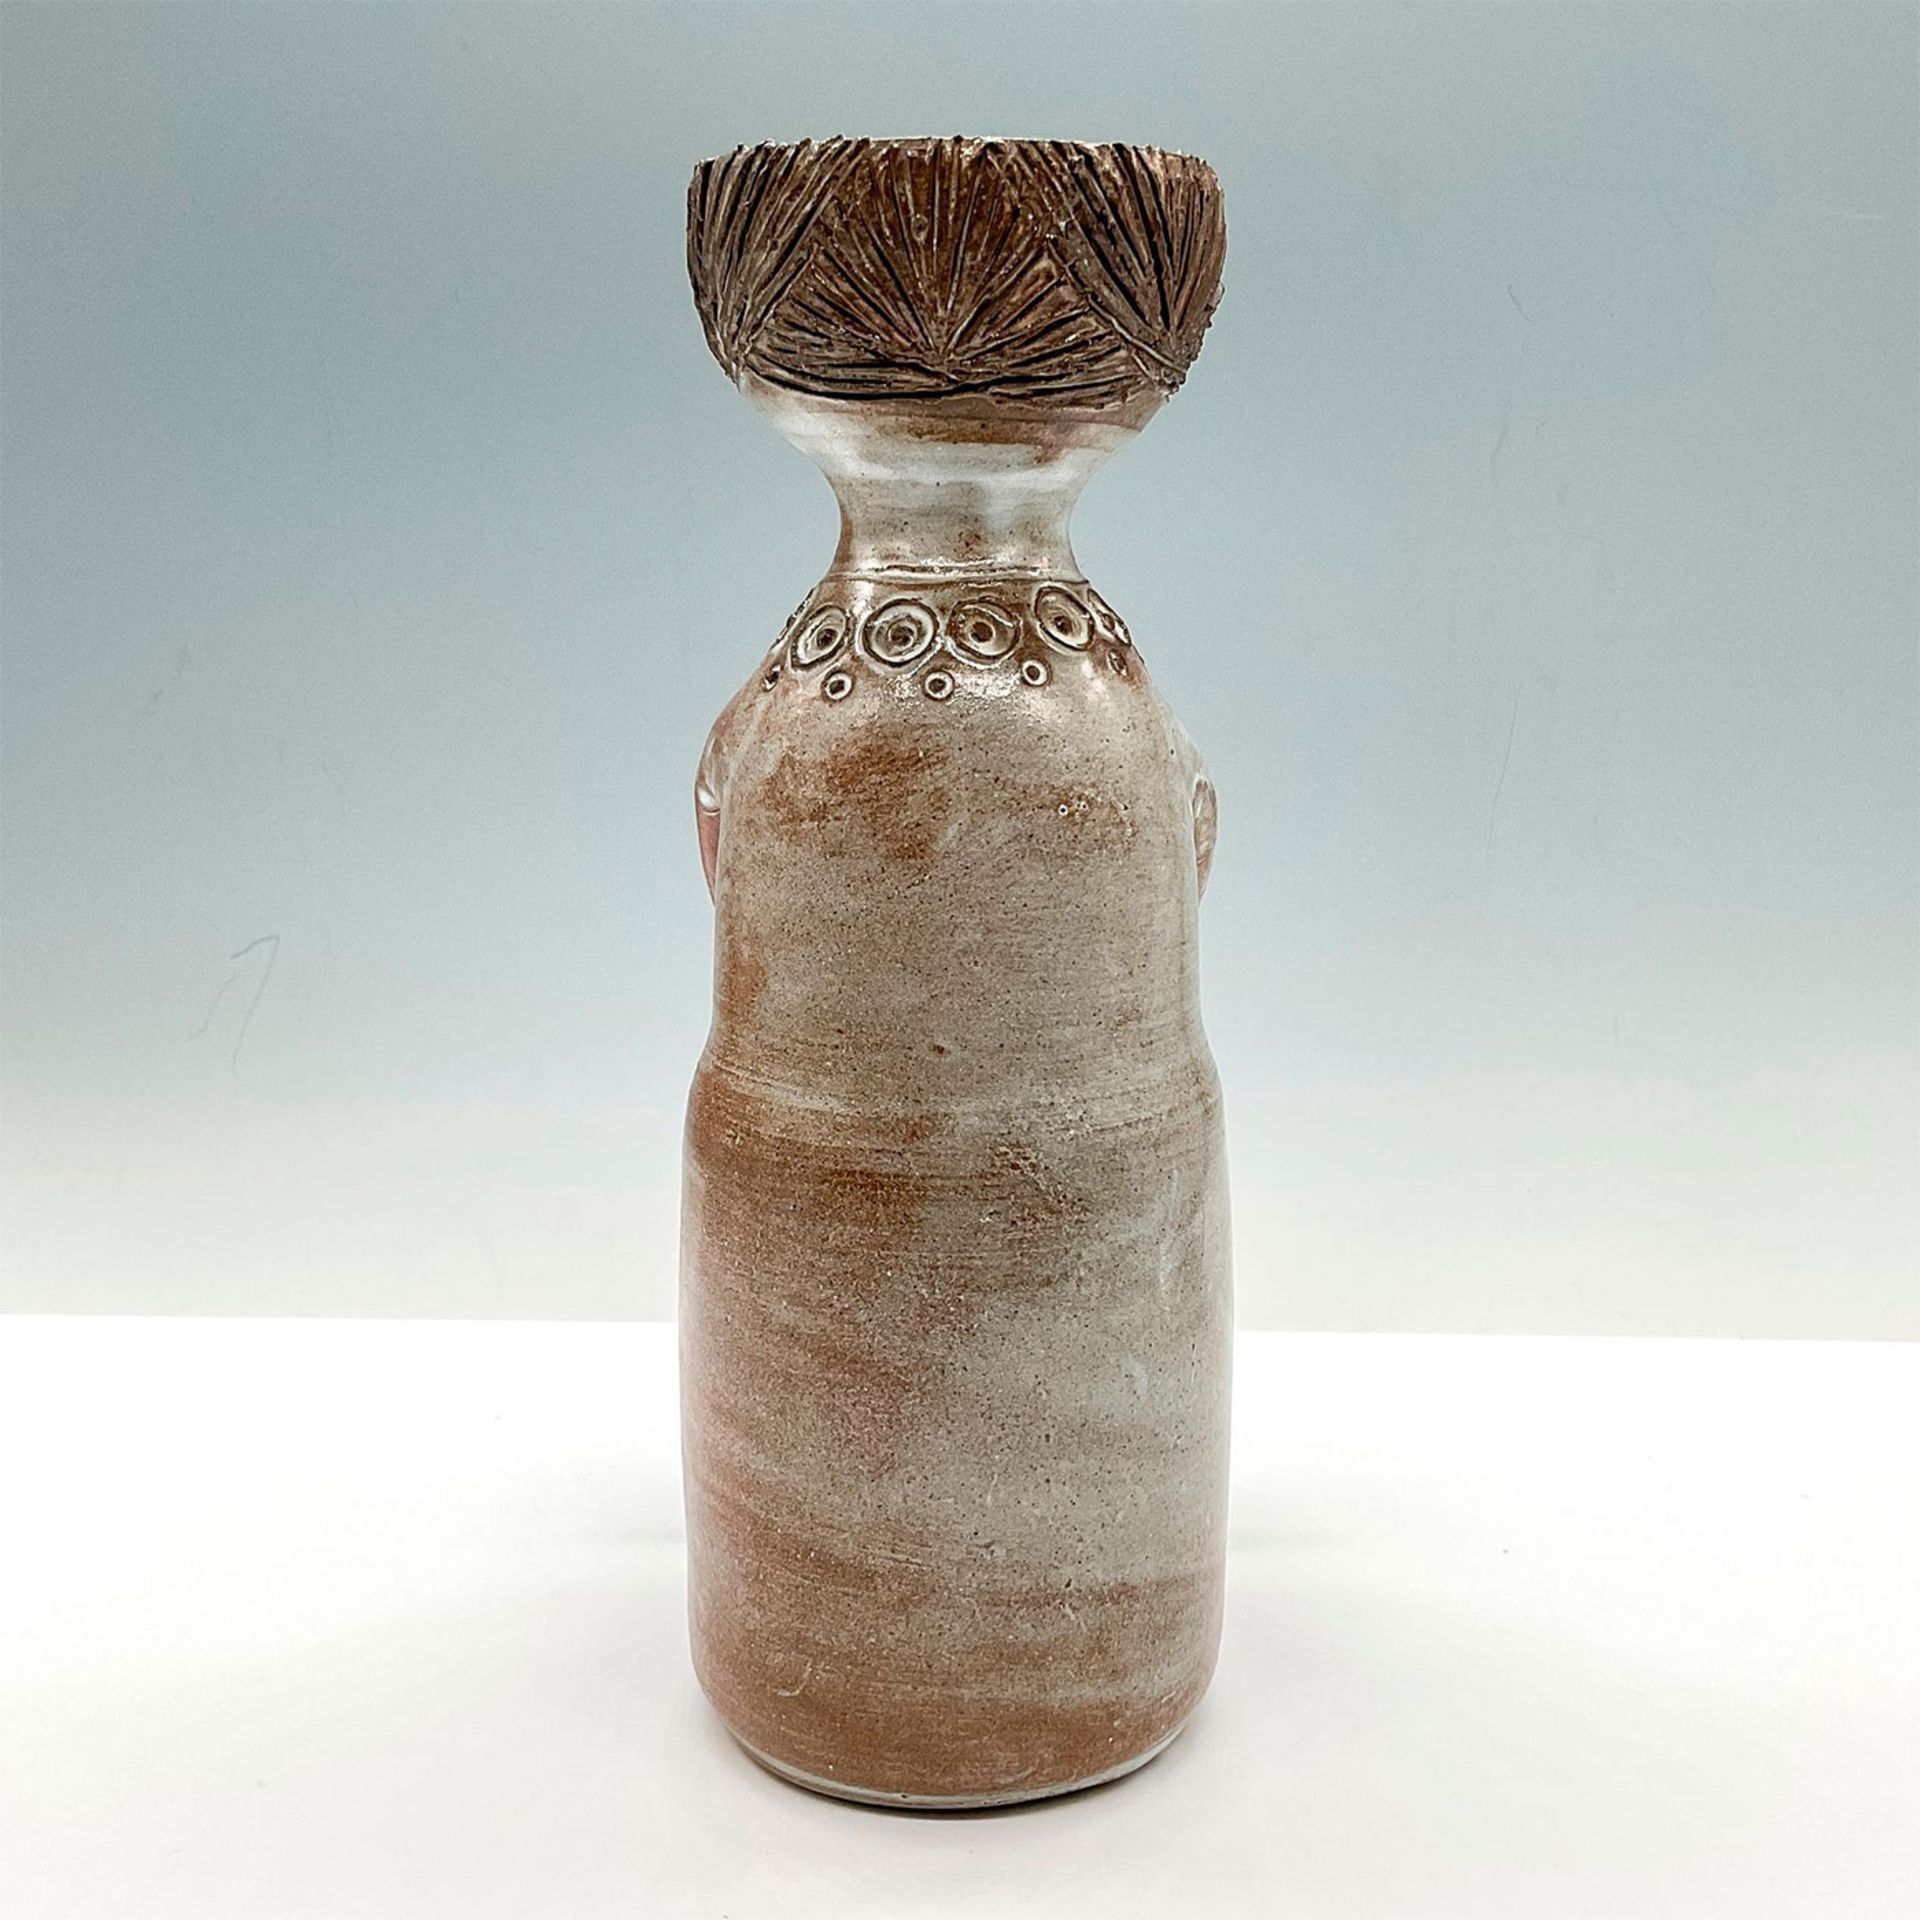 Jacques Pouchain (French, 1925-2015) Art Pottery Vase - Image 2 of 4